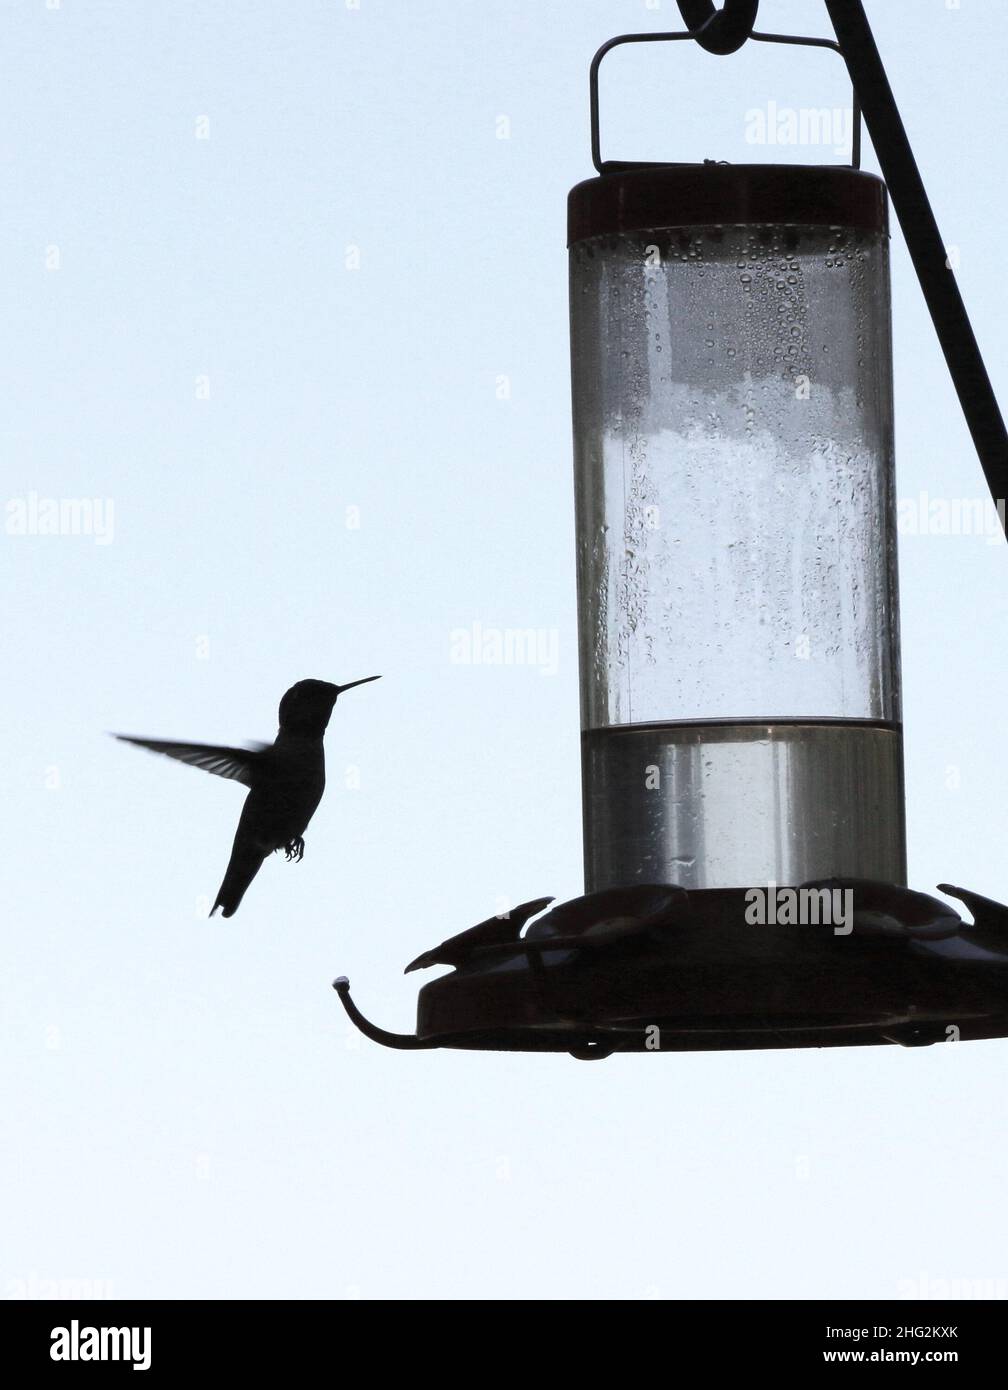 Black and white image: silhouette of a small hummingbird suspended in air by a feeder full of sugar water. Stock Photo